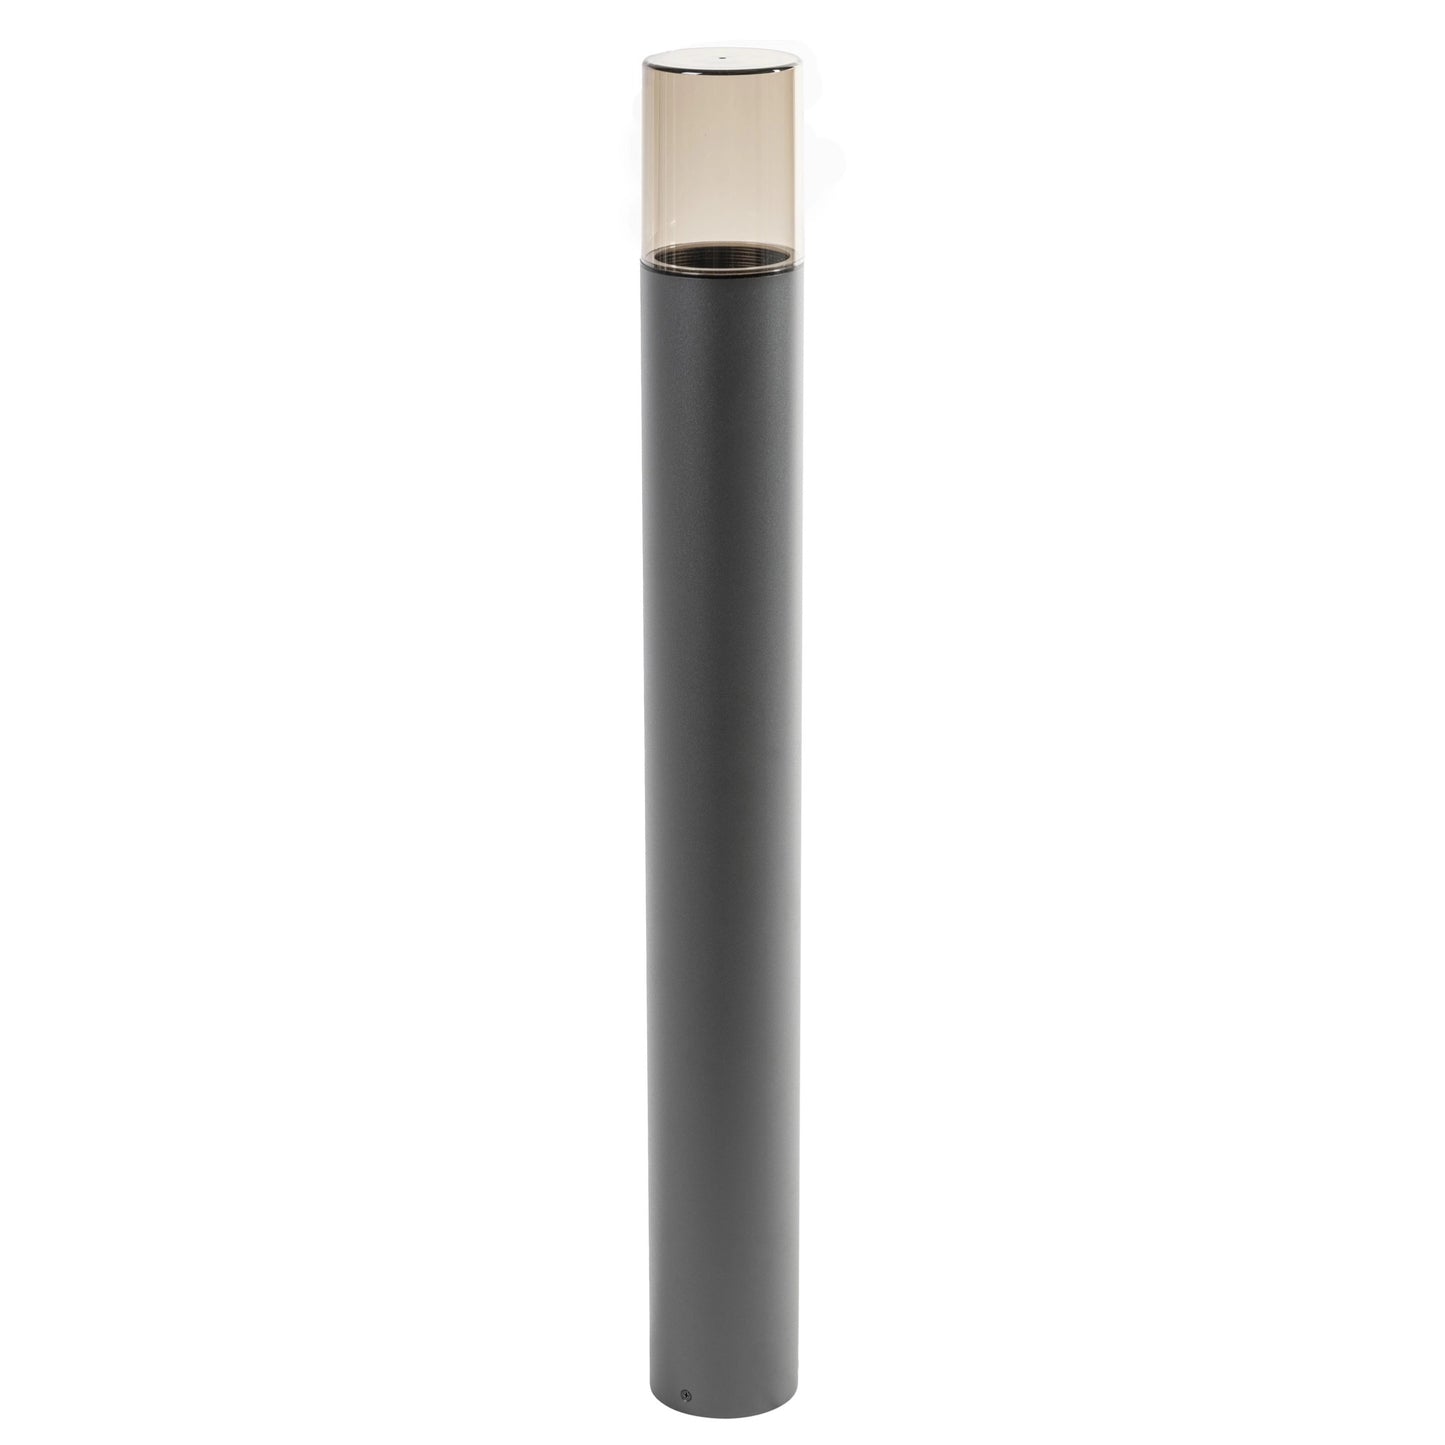 This post light is featured with a smoky diffuser, dark grey finish and ideal for outdoor use. Measuring around 50cm in height, this elegantly designed pillar light blends with either modern or traditional houses. The extended height of this product (compared to our medium dark grey post light) allows it to show off its features better. 